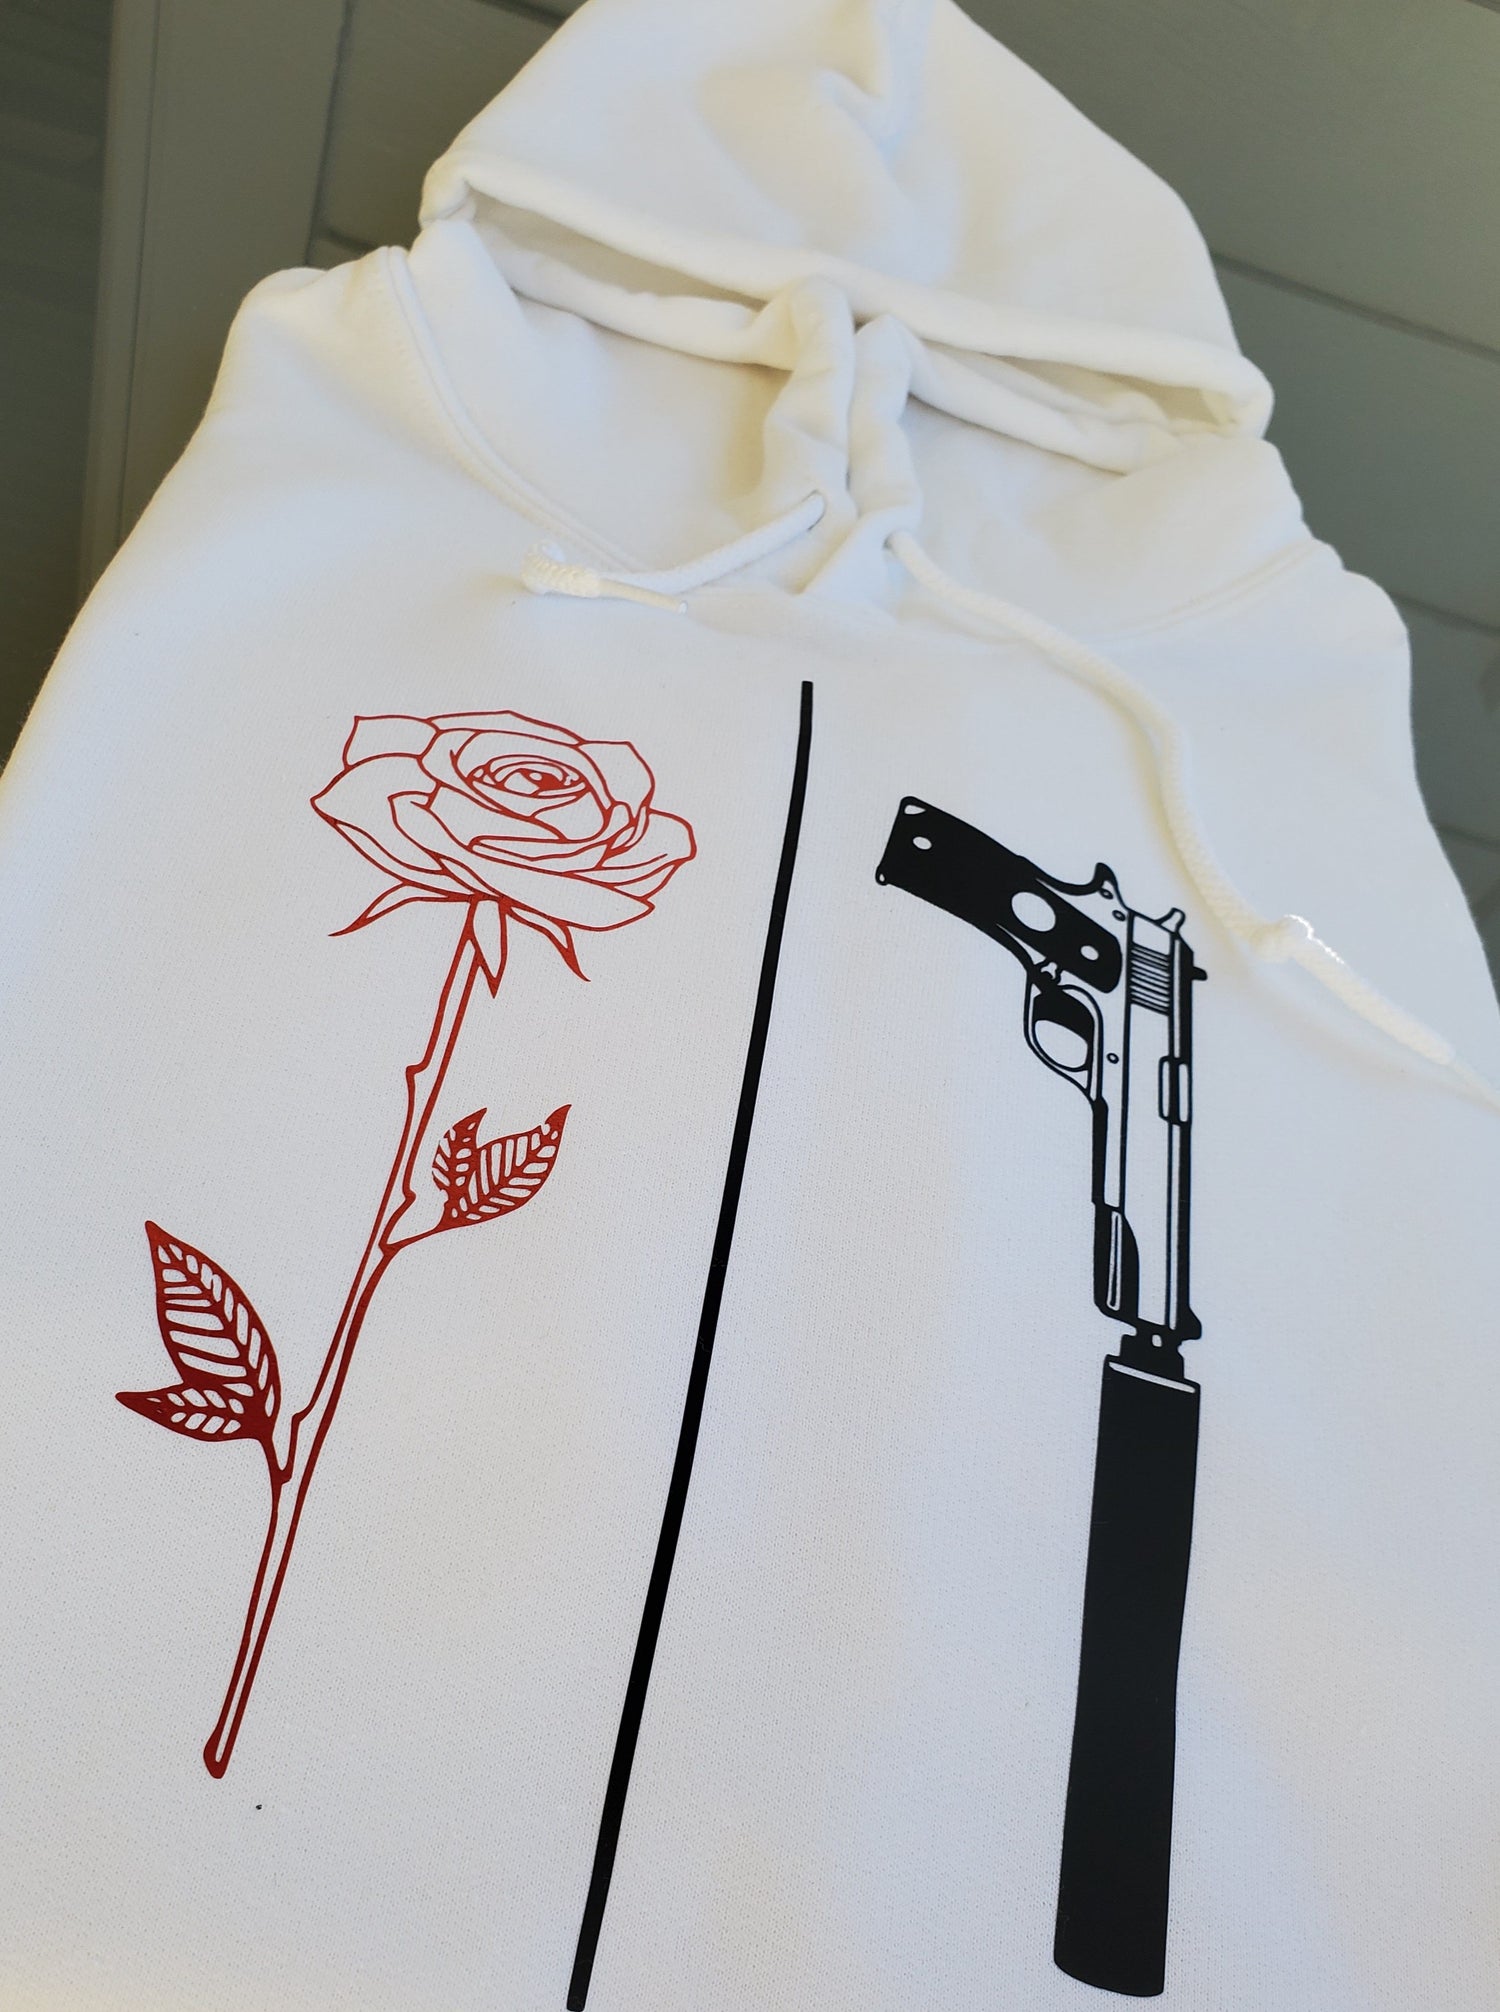 A Thin Line Valentine's Day Hoodie - Centre Ave Clothing Co.